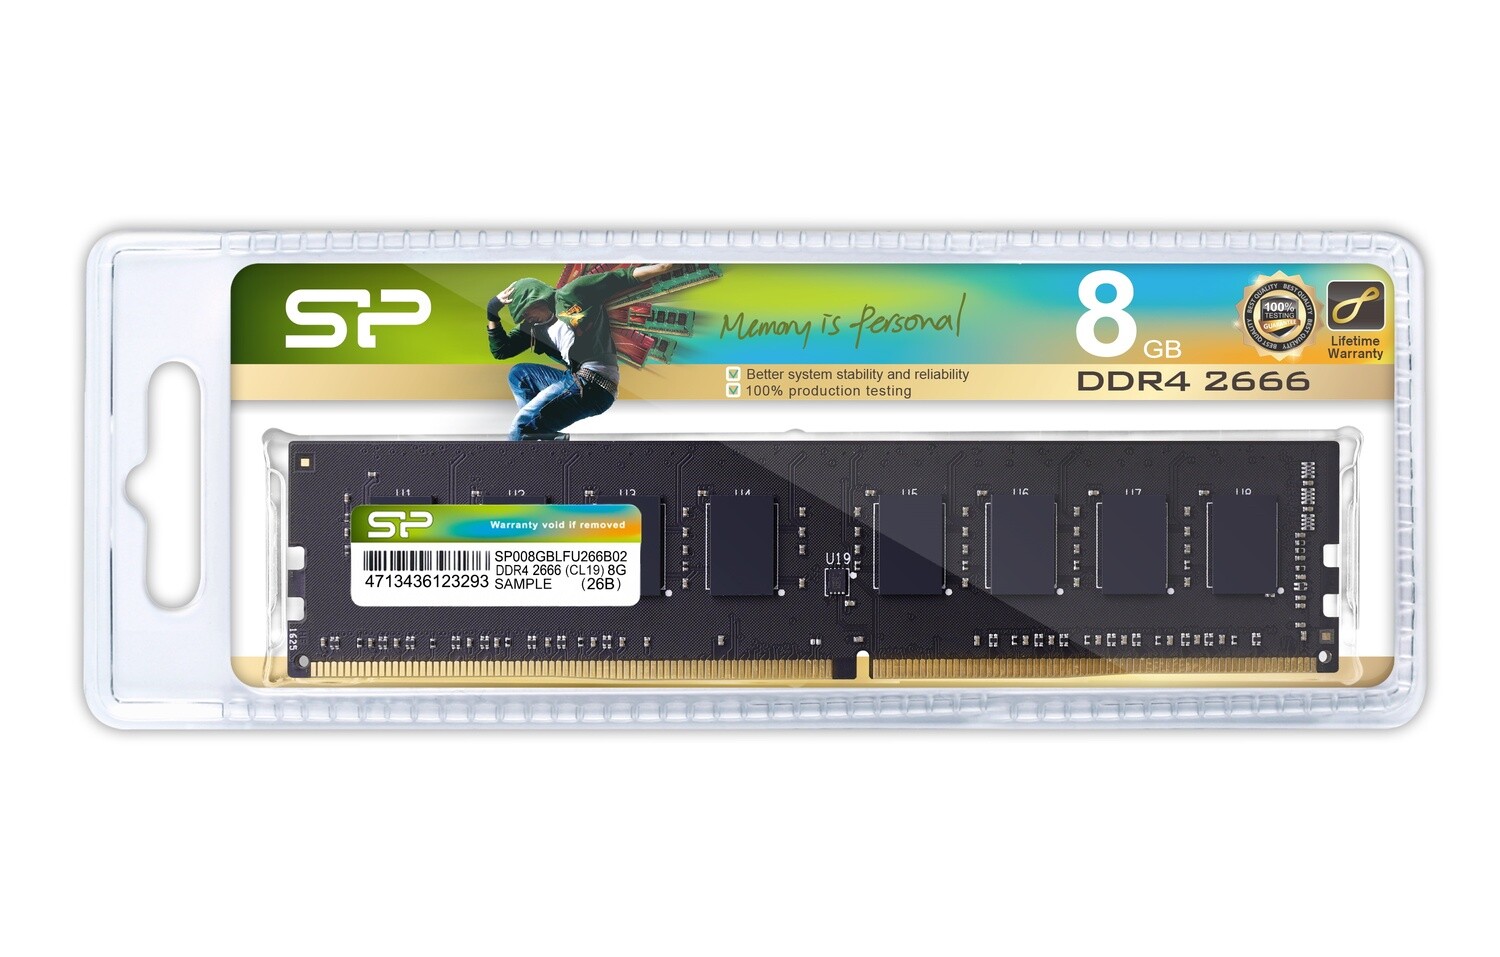 SILICON POWER SP 8GB DDR4-3200 LONGDIMM  MEMORY